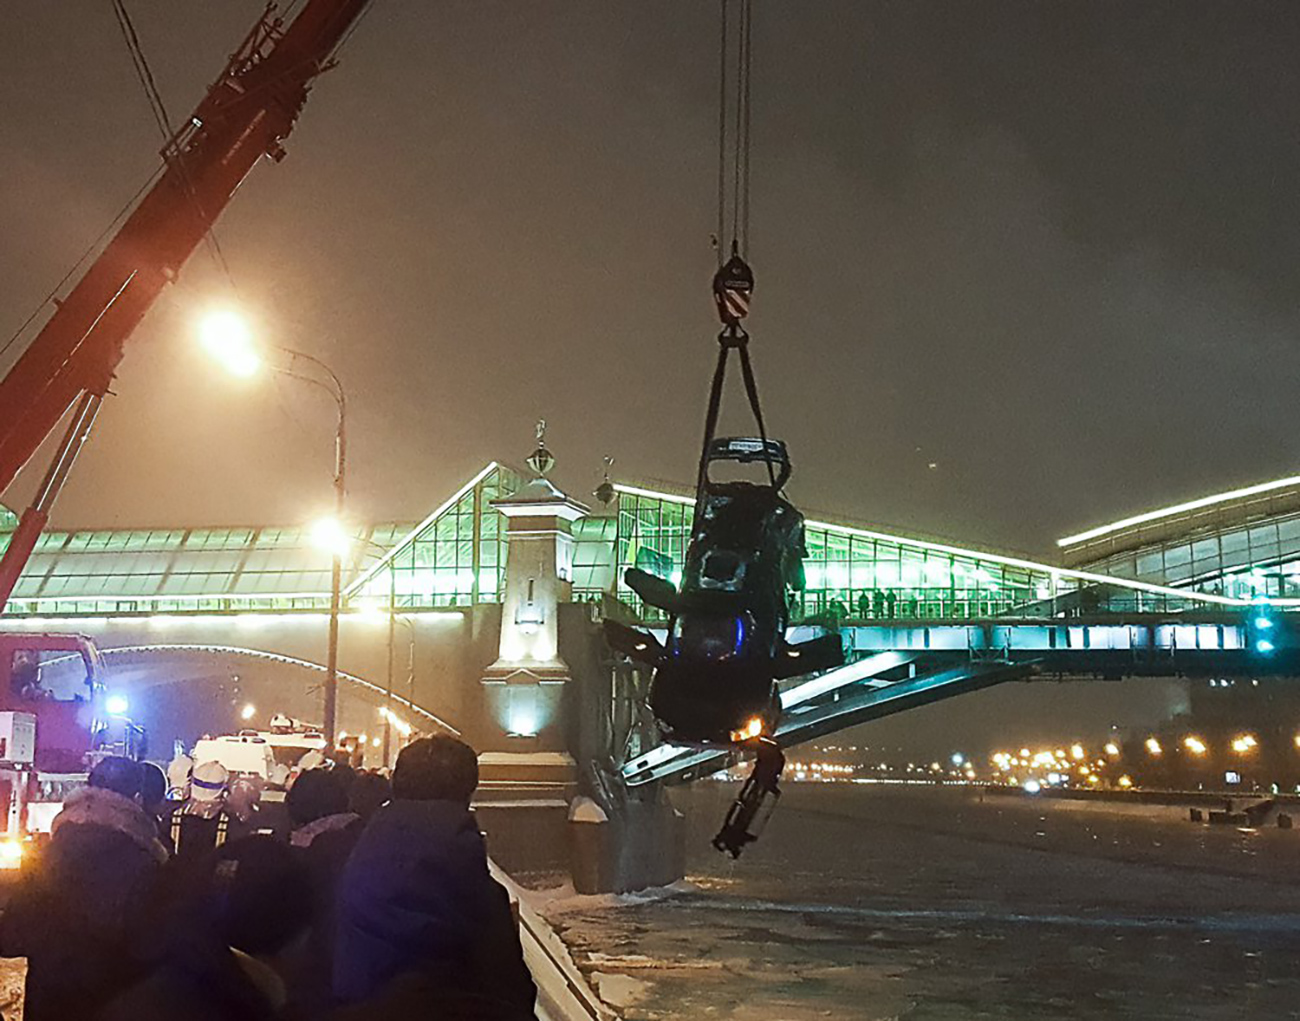 As a result of a car crash in central Moscow, a Subaru Forester smashed through the metal road railing and plunged into the Moscow River.